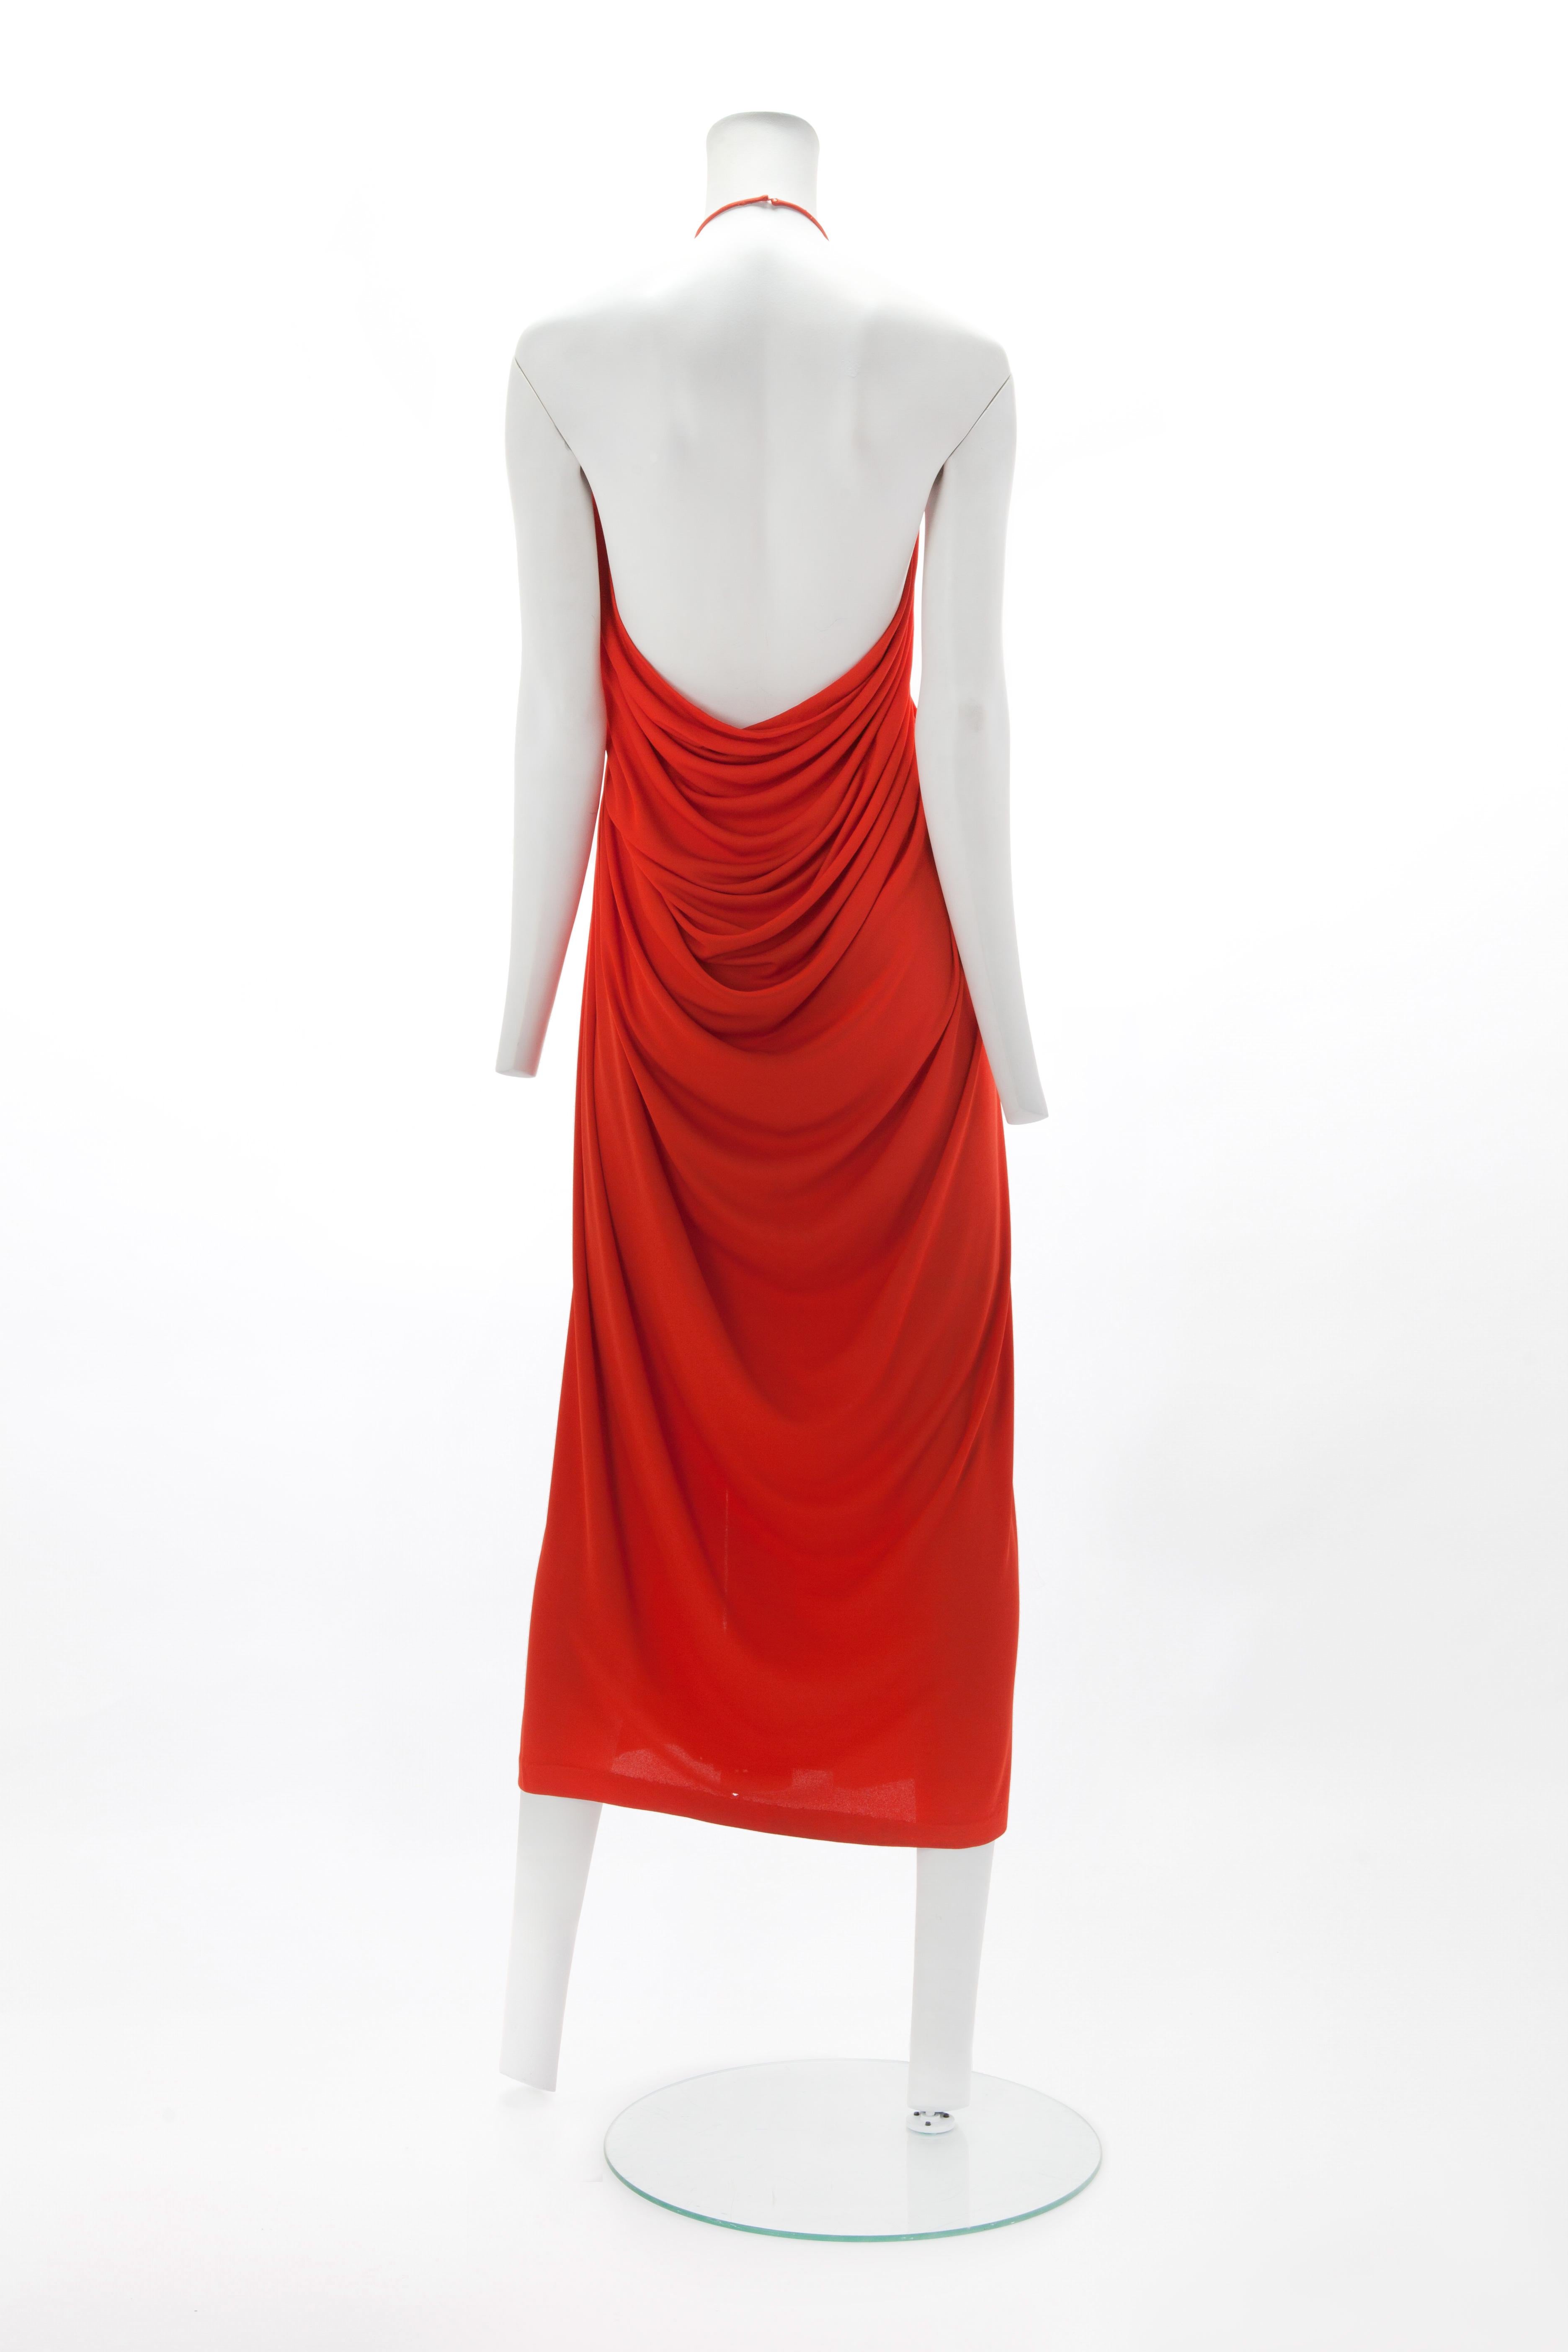 c. 1970s HALSTON Orange Matte Jersey Halter Dress with Matching Jacket In Good Condition For Sale In New York, NY